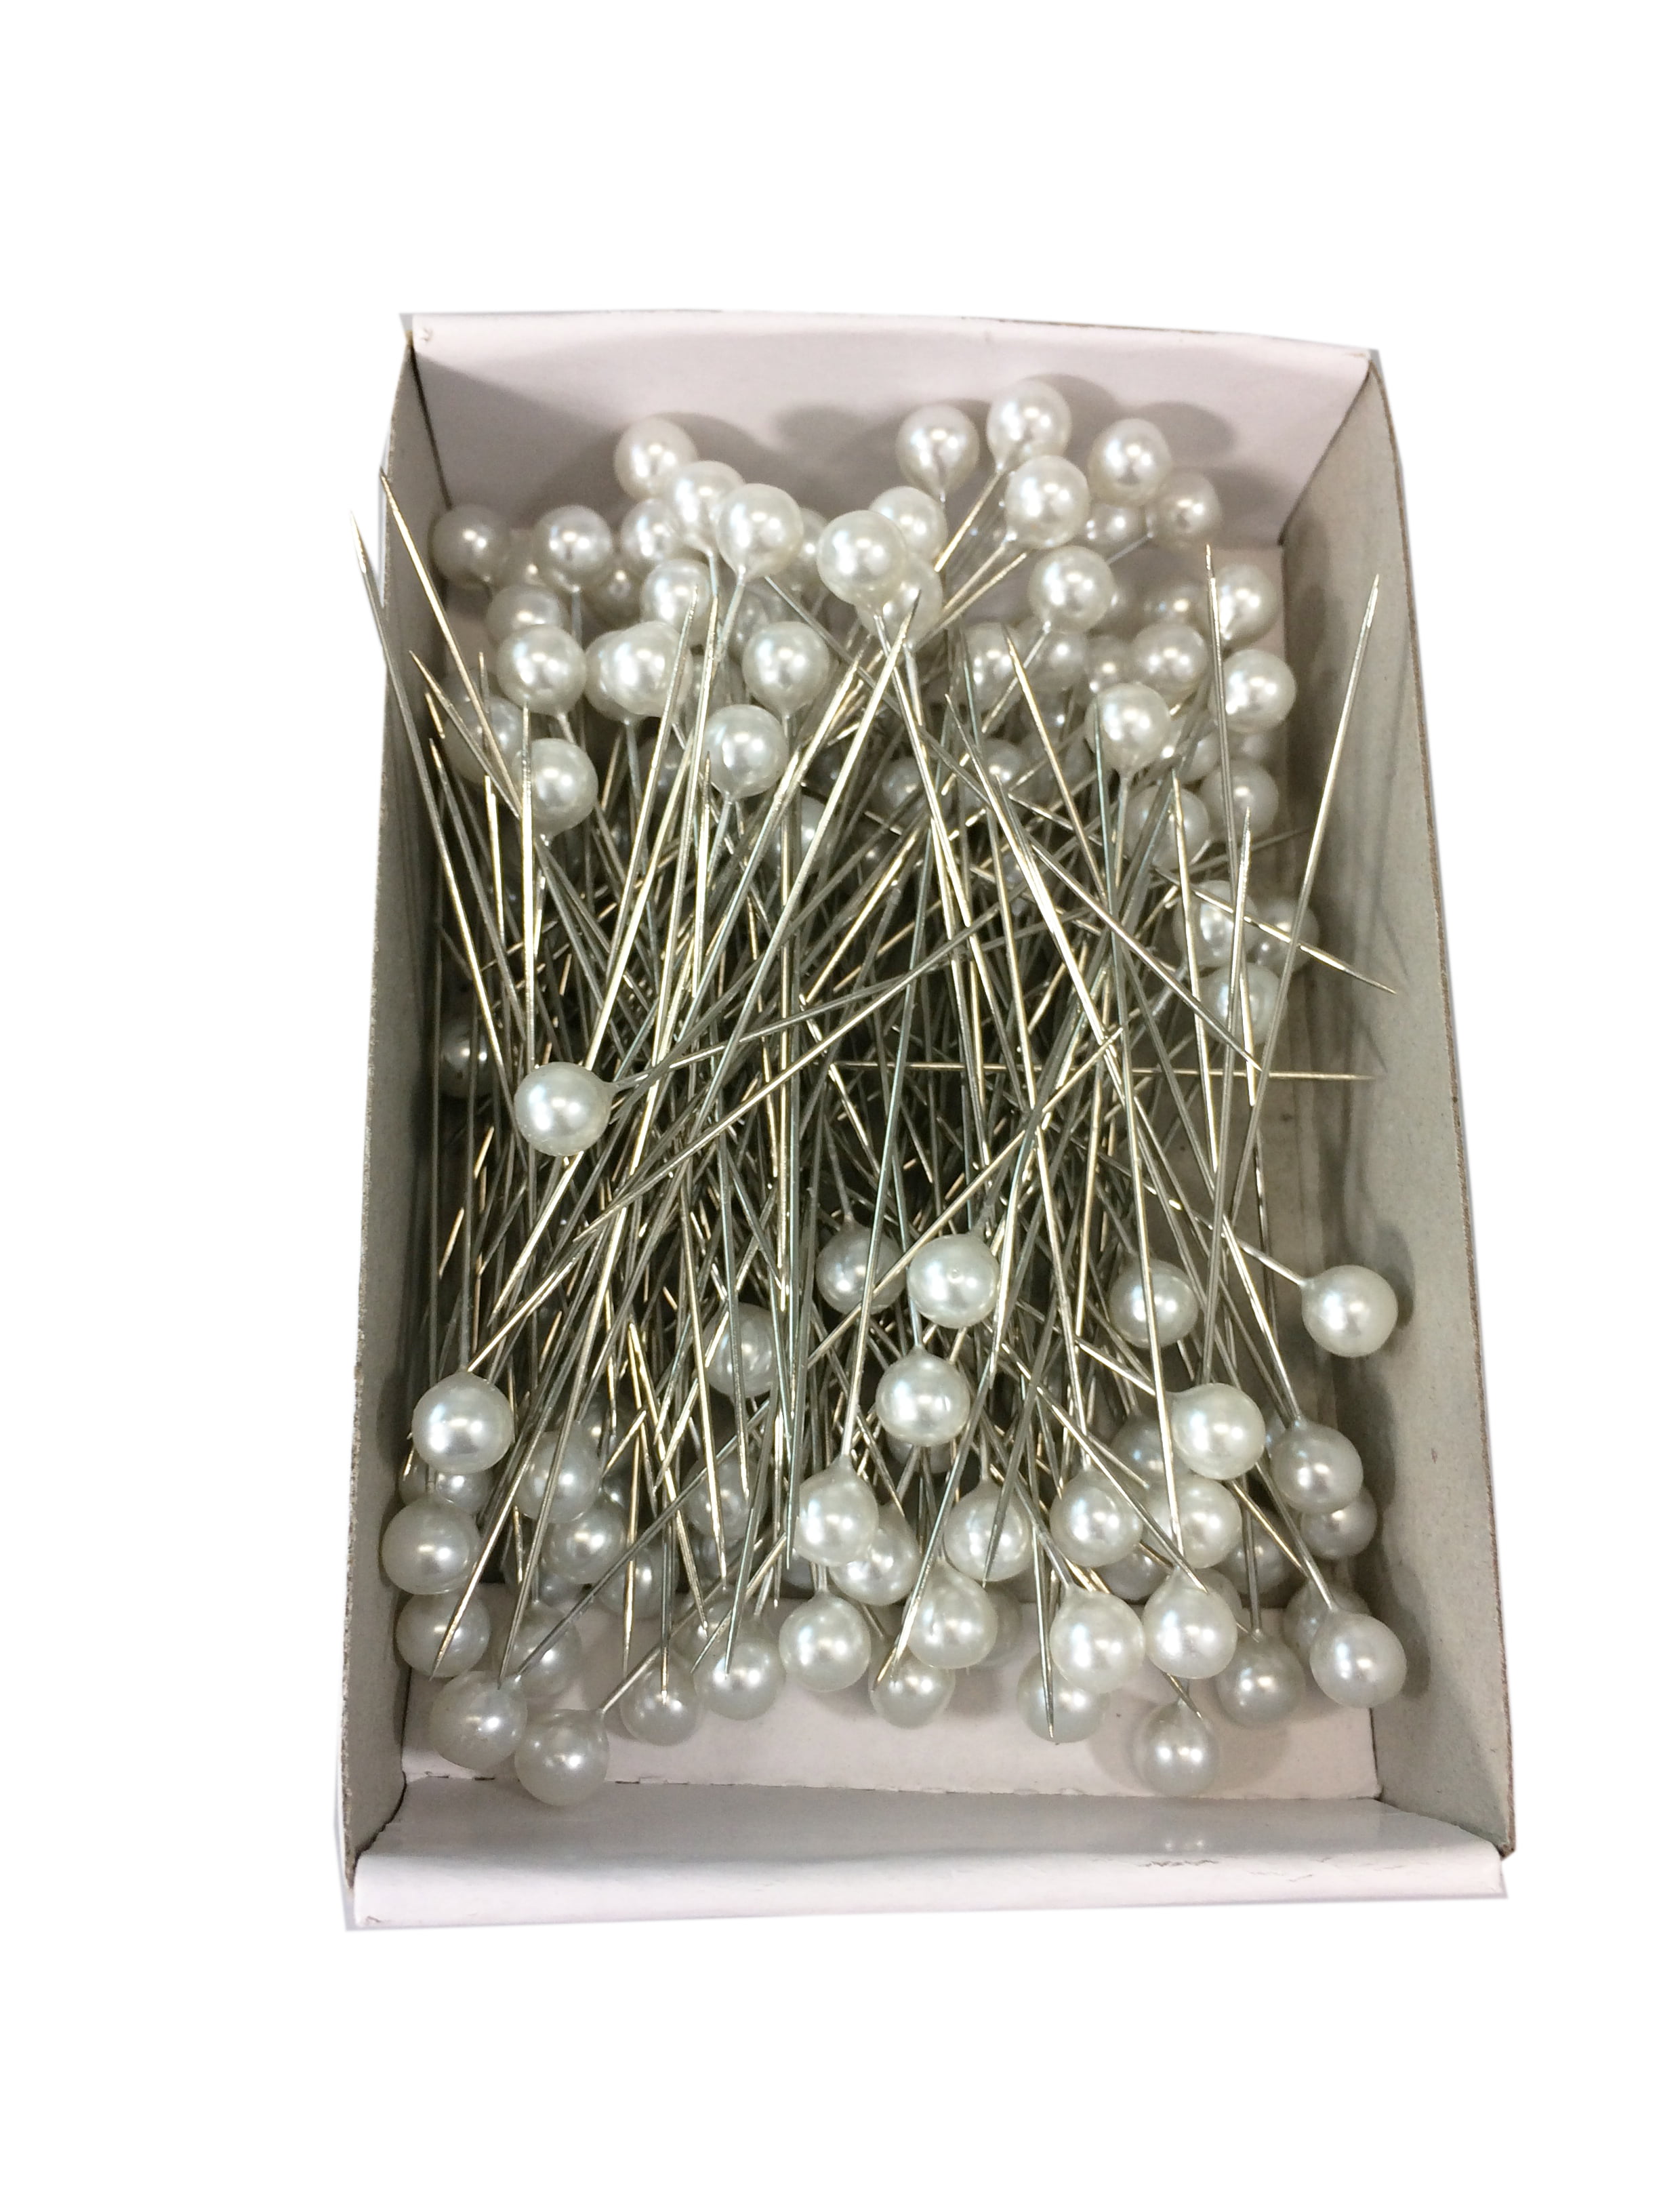 2.5 Pear-Shaped Corsage Pins *144 pc pkg* - Pearl